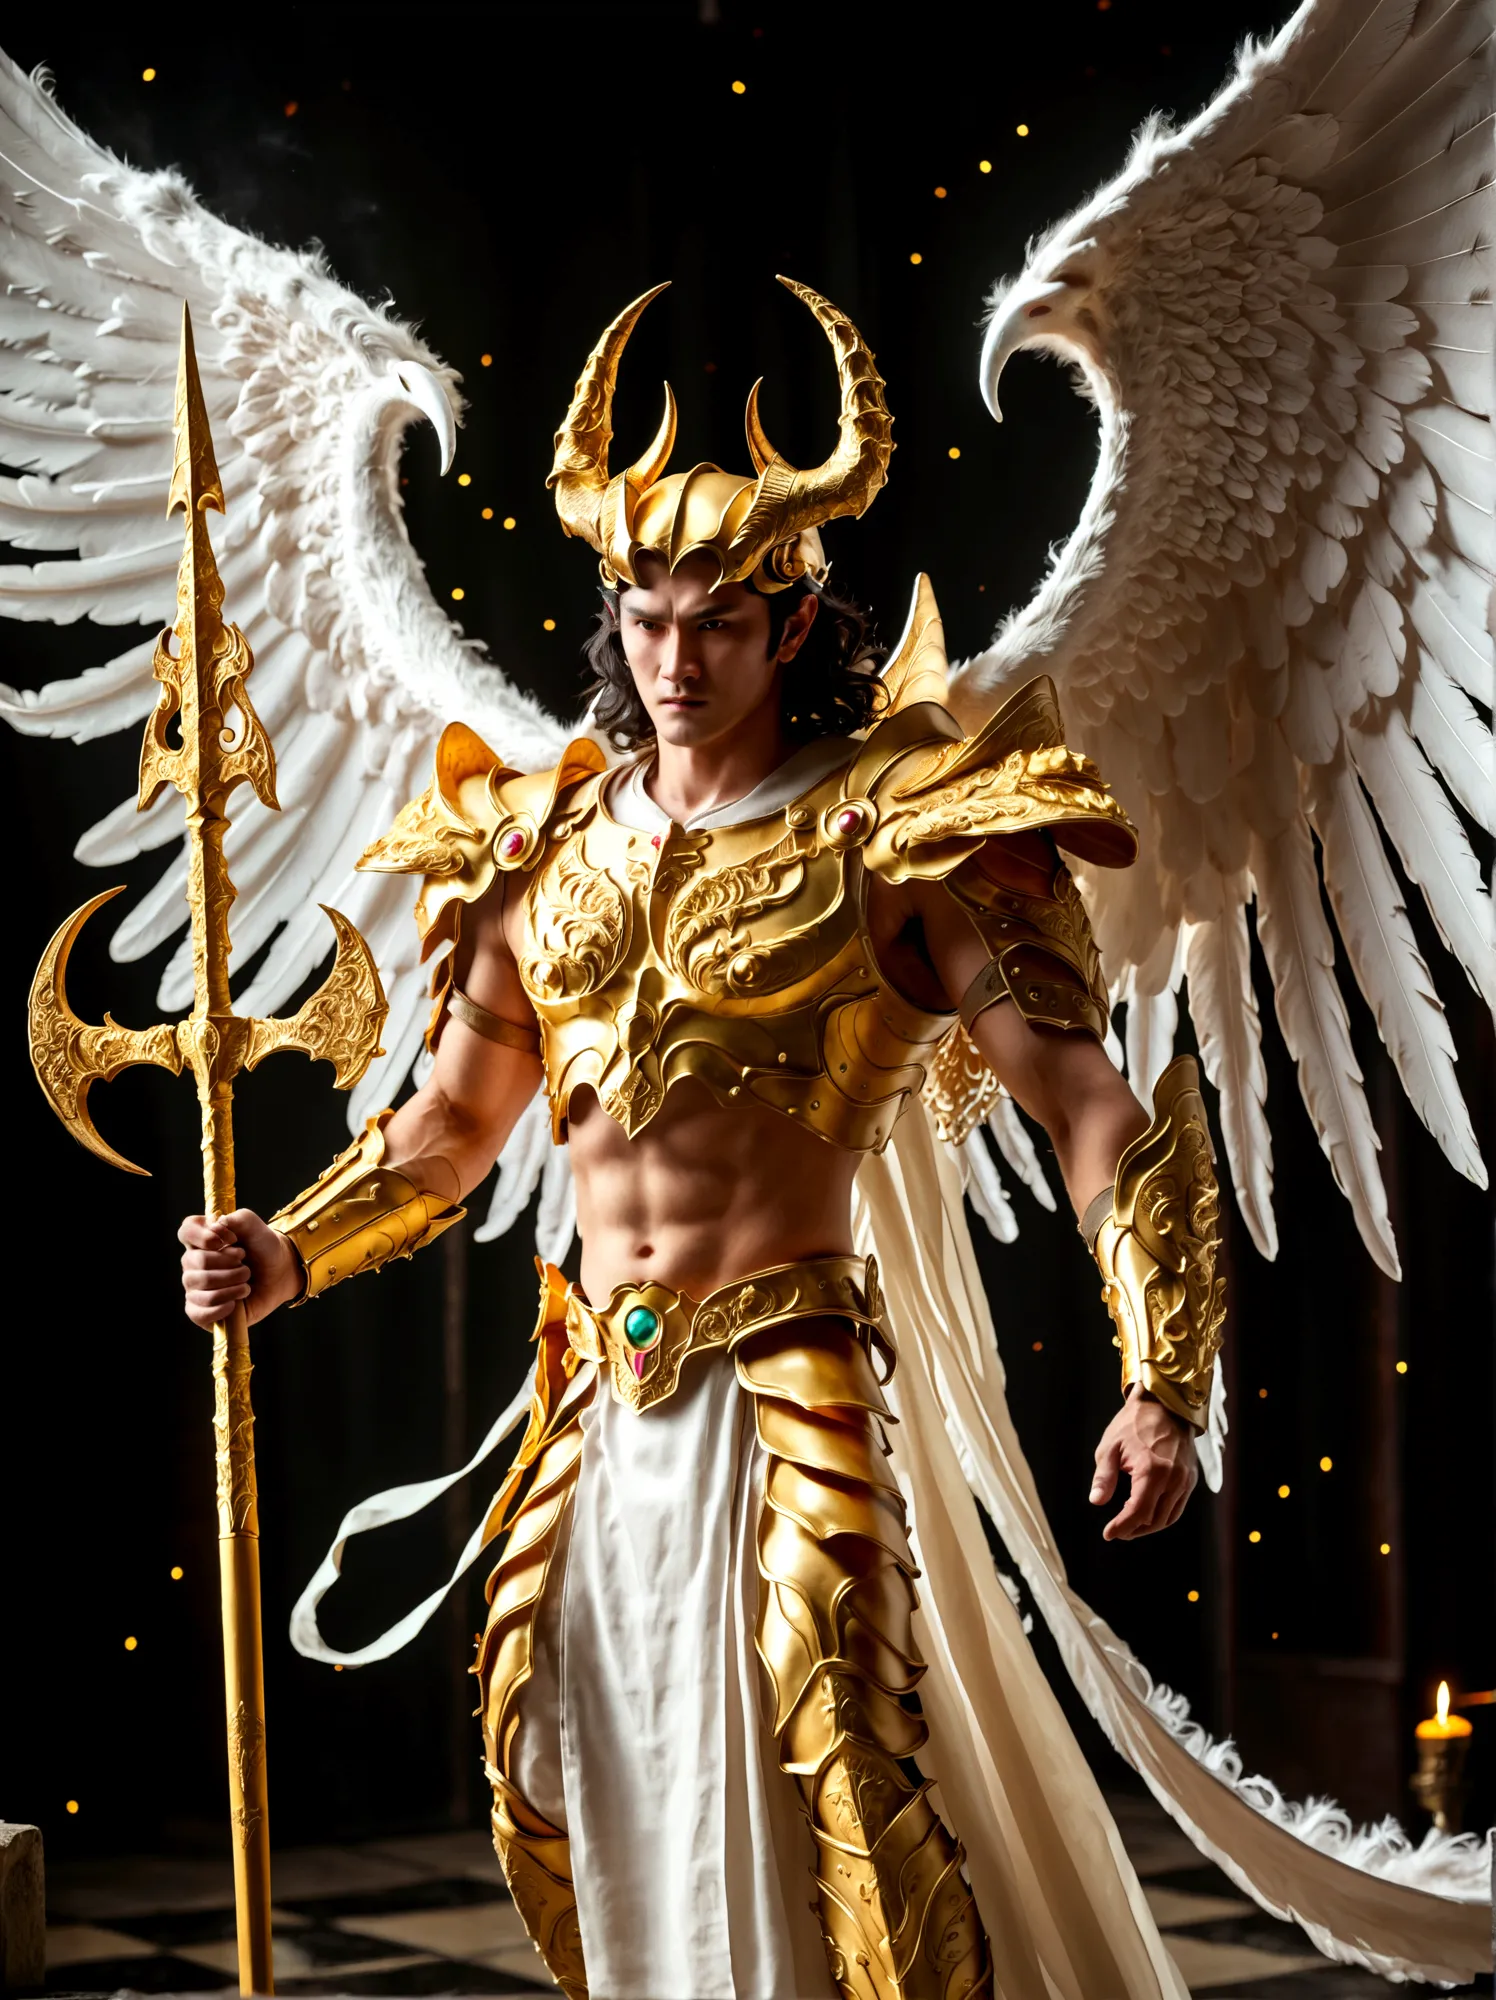 A man with angel wings and demon horns wielding a golden spear